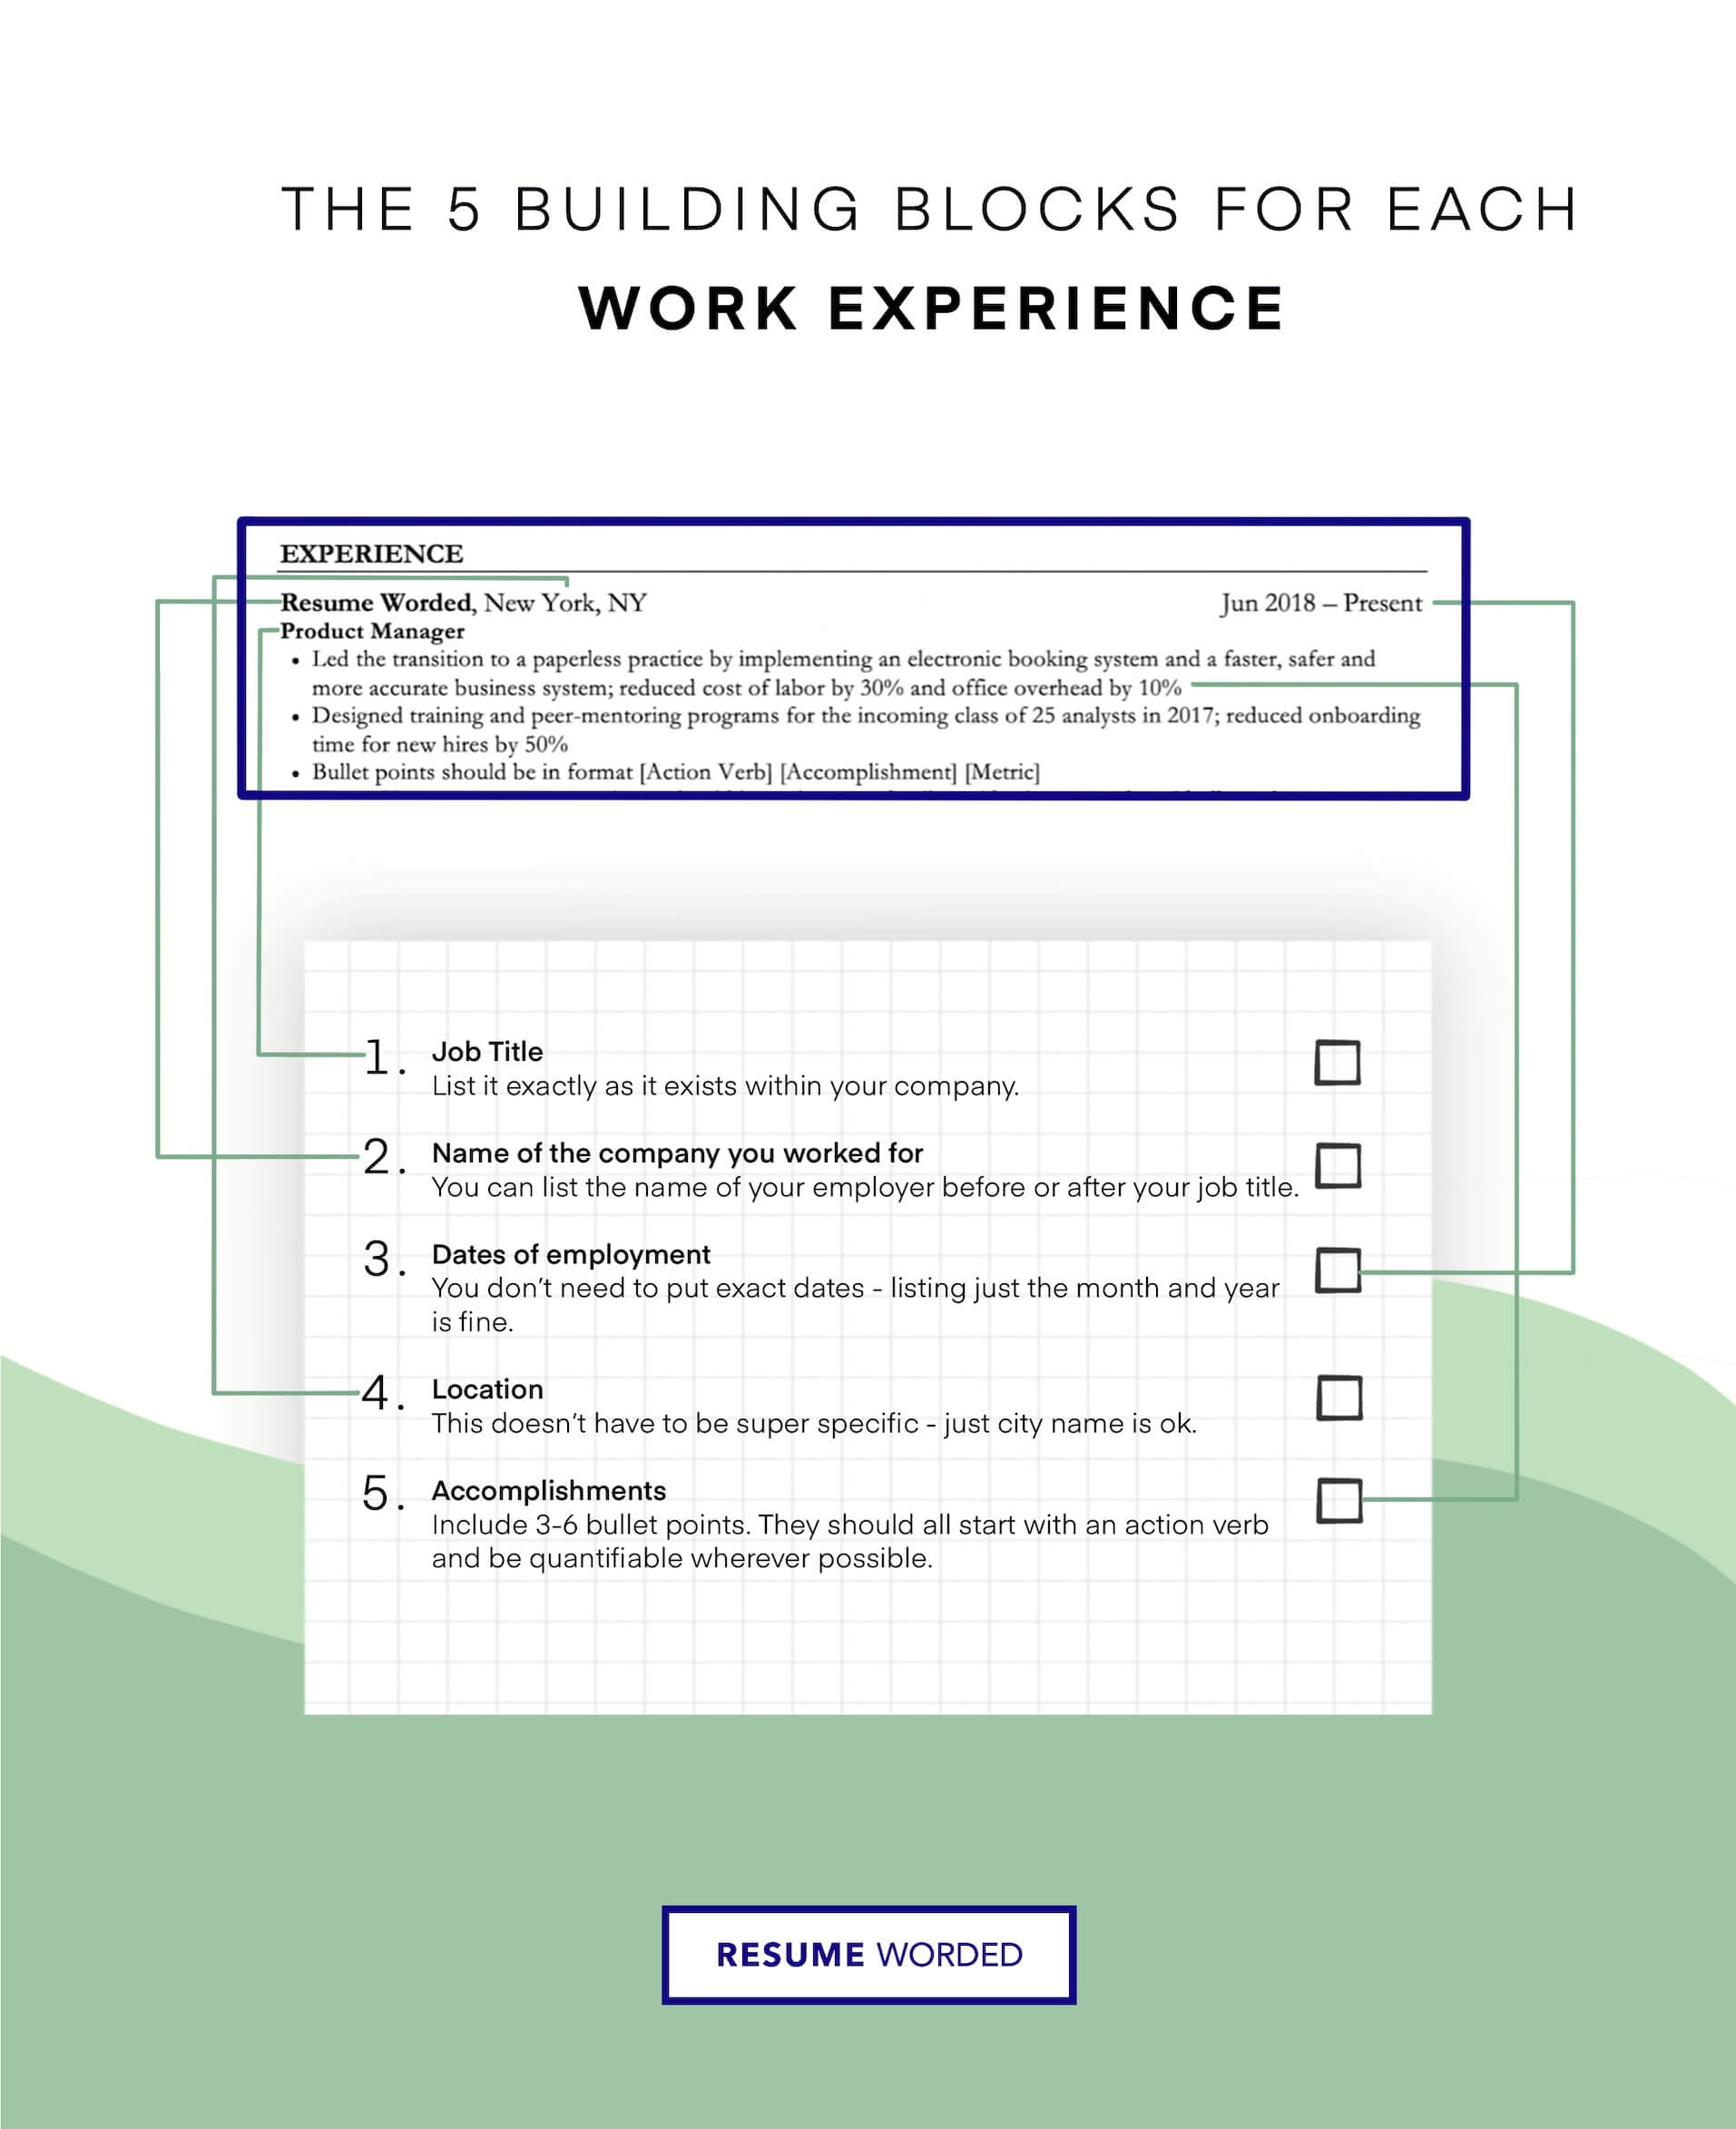 Highlight your practical experience - Entry Level Data Scientist CV